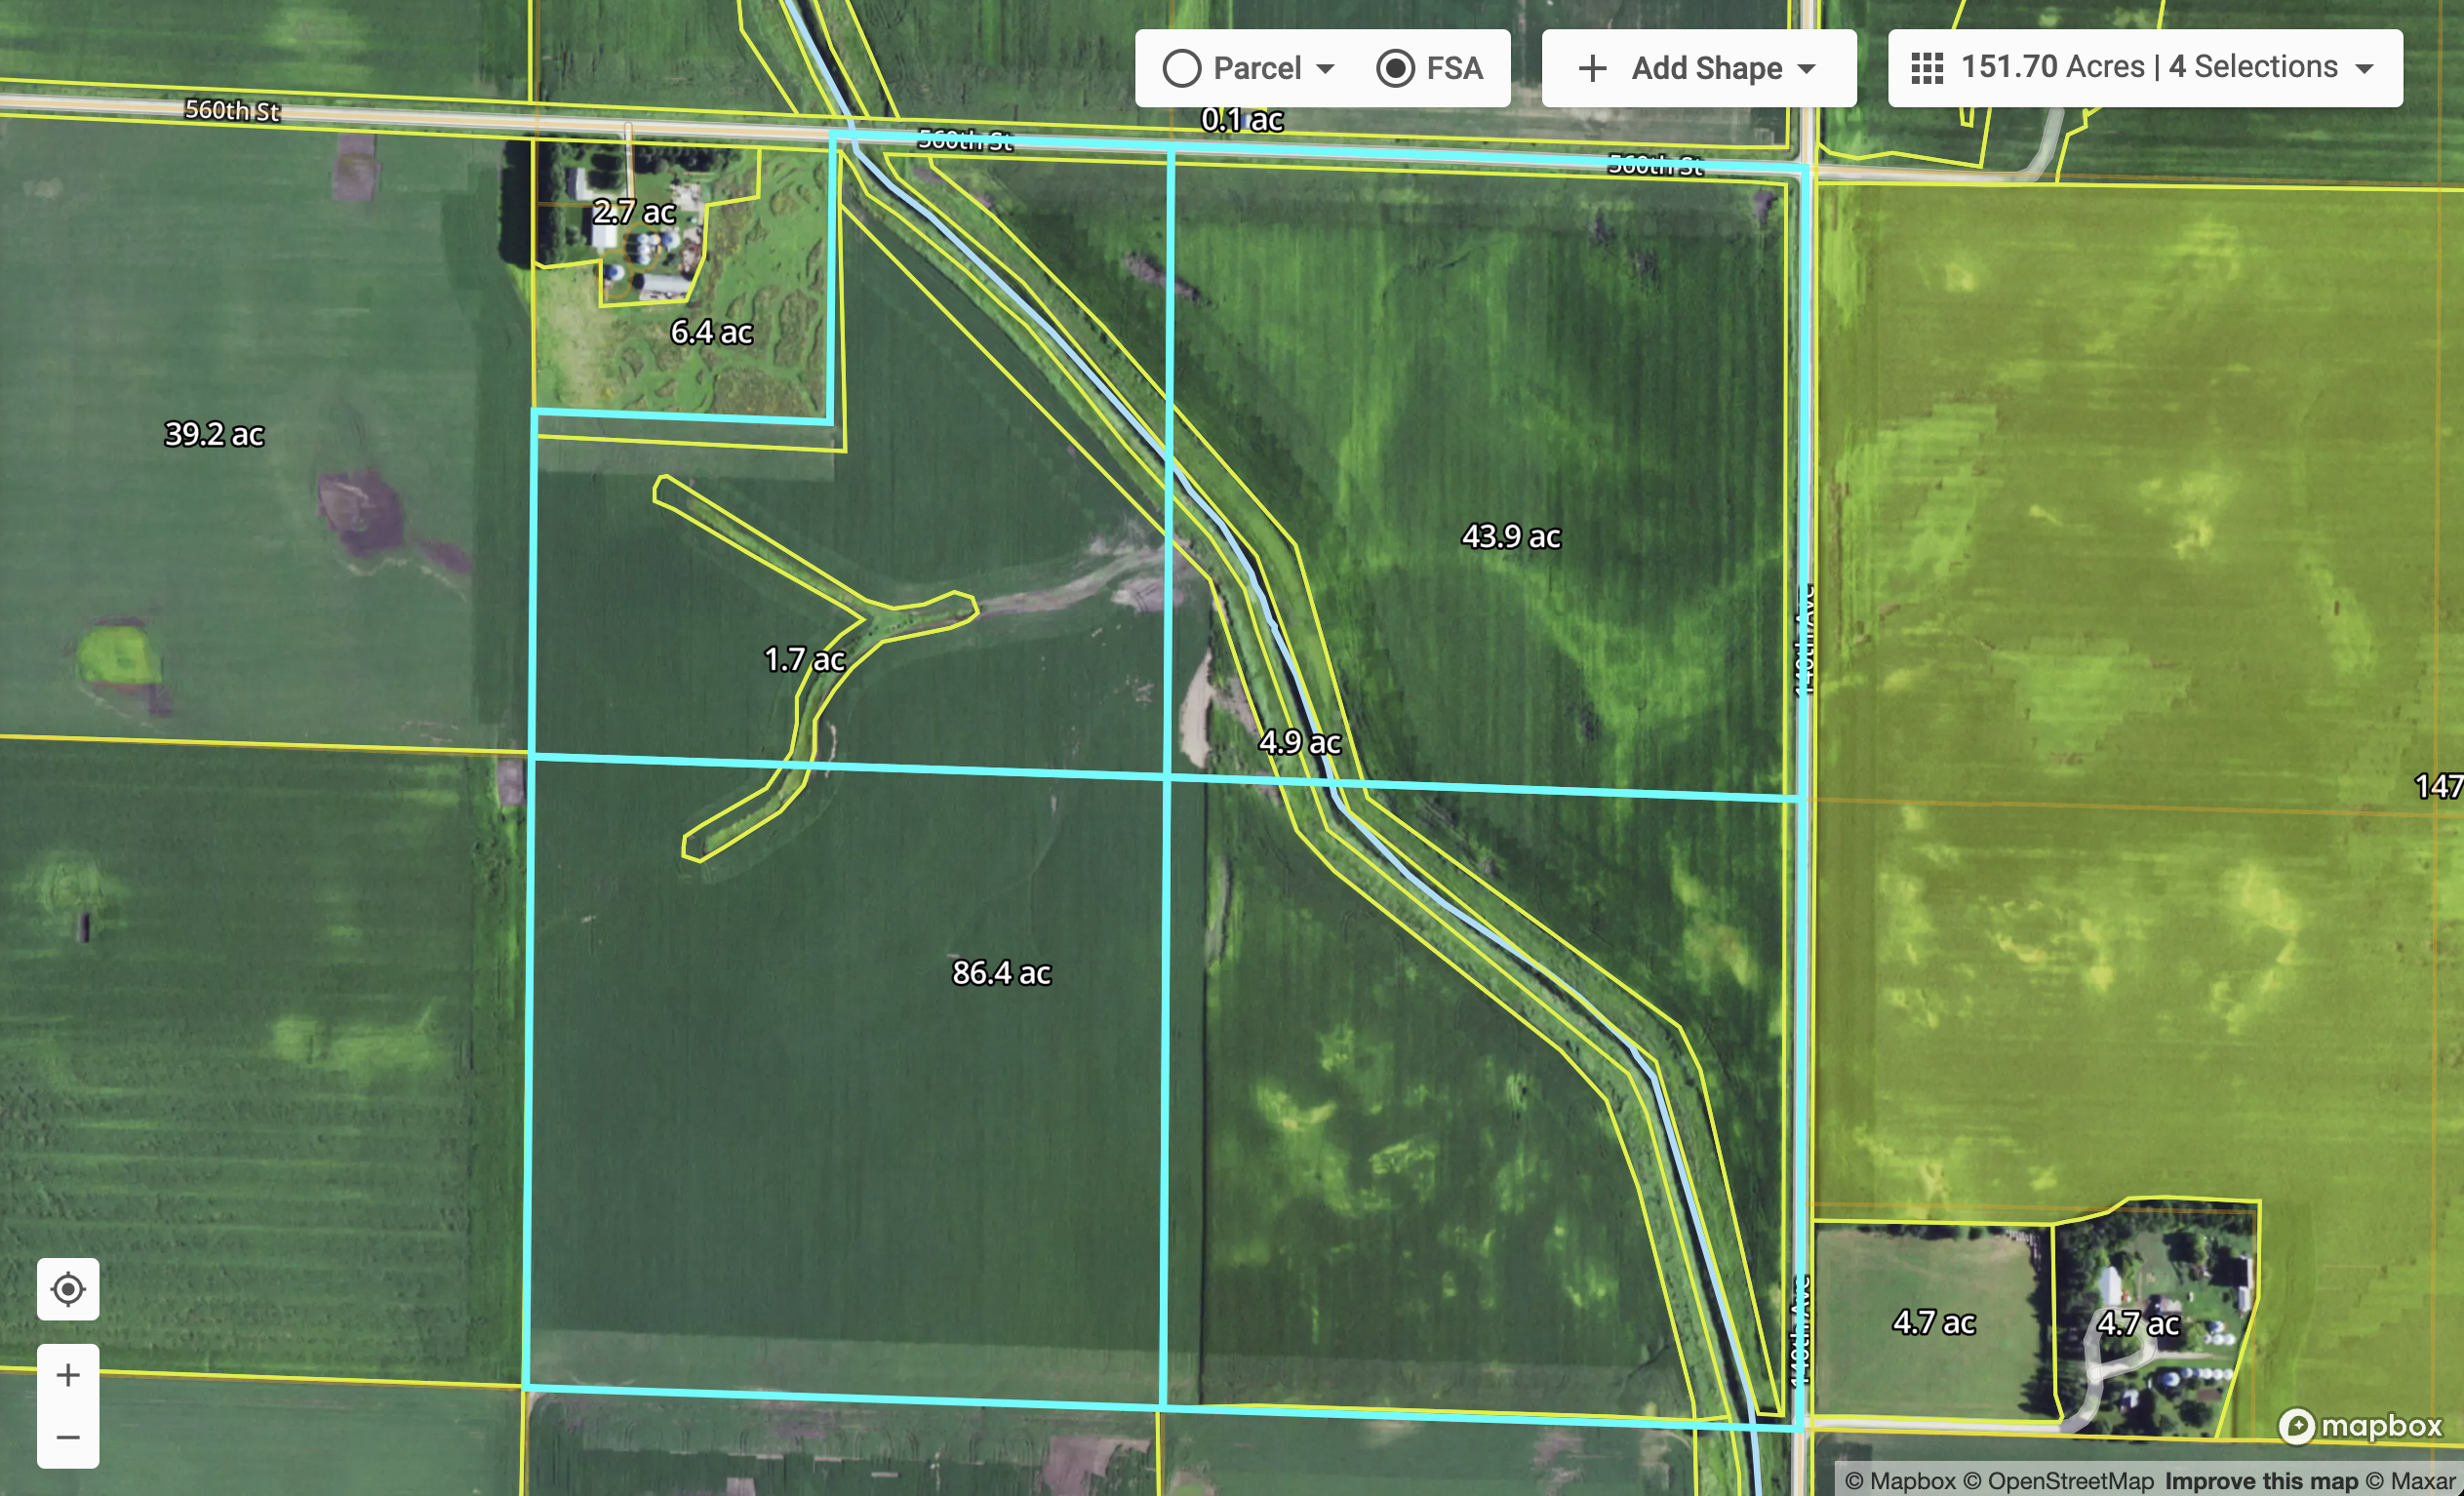 The FSA layer overlays the map with boundaries for tillable acres